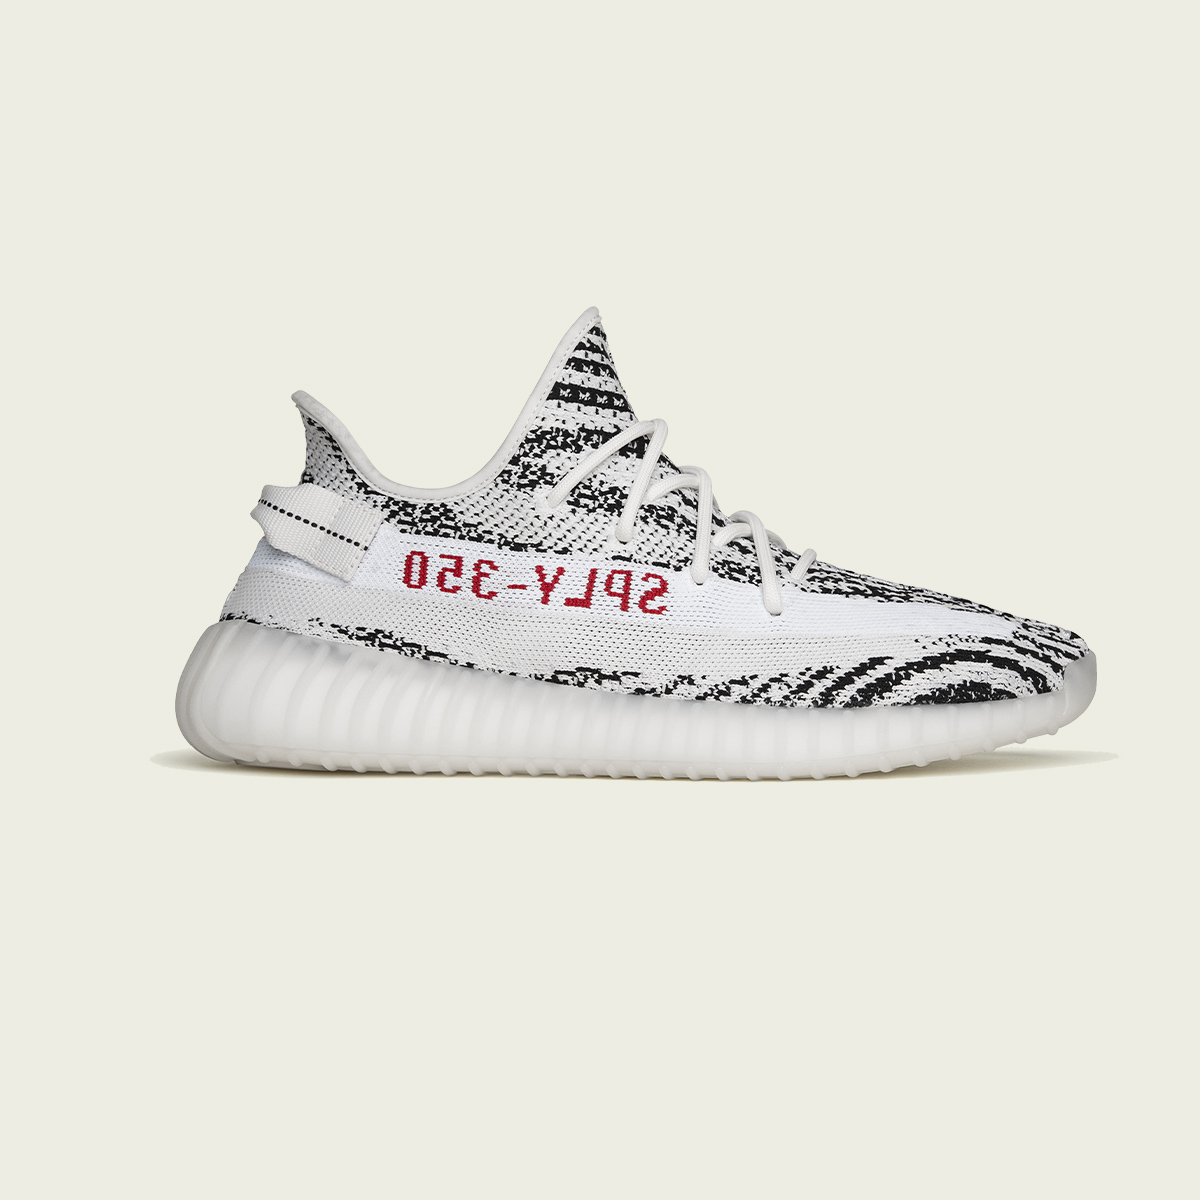 Foot Locker on Twitter: "#YEEZY BOOST 350 V2 'ZEBRA' LAUNCHES APRIL 9TH IN  MEN'S SIZES. Reservations are now open via the Foot Locker App.  https://t.co/Ic42omPHXP" / Twitter